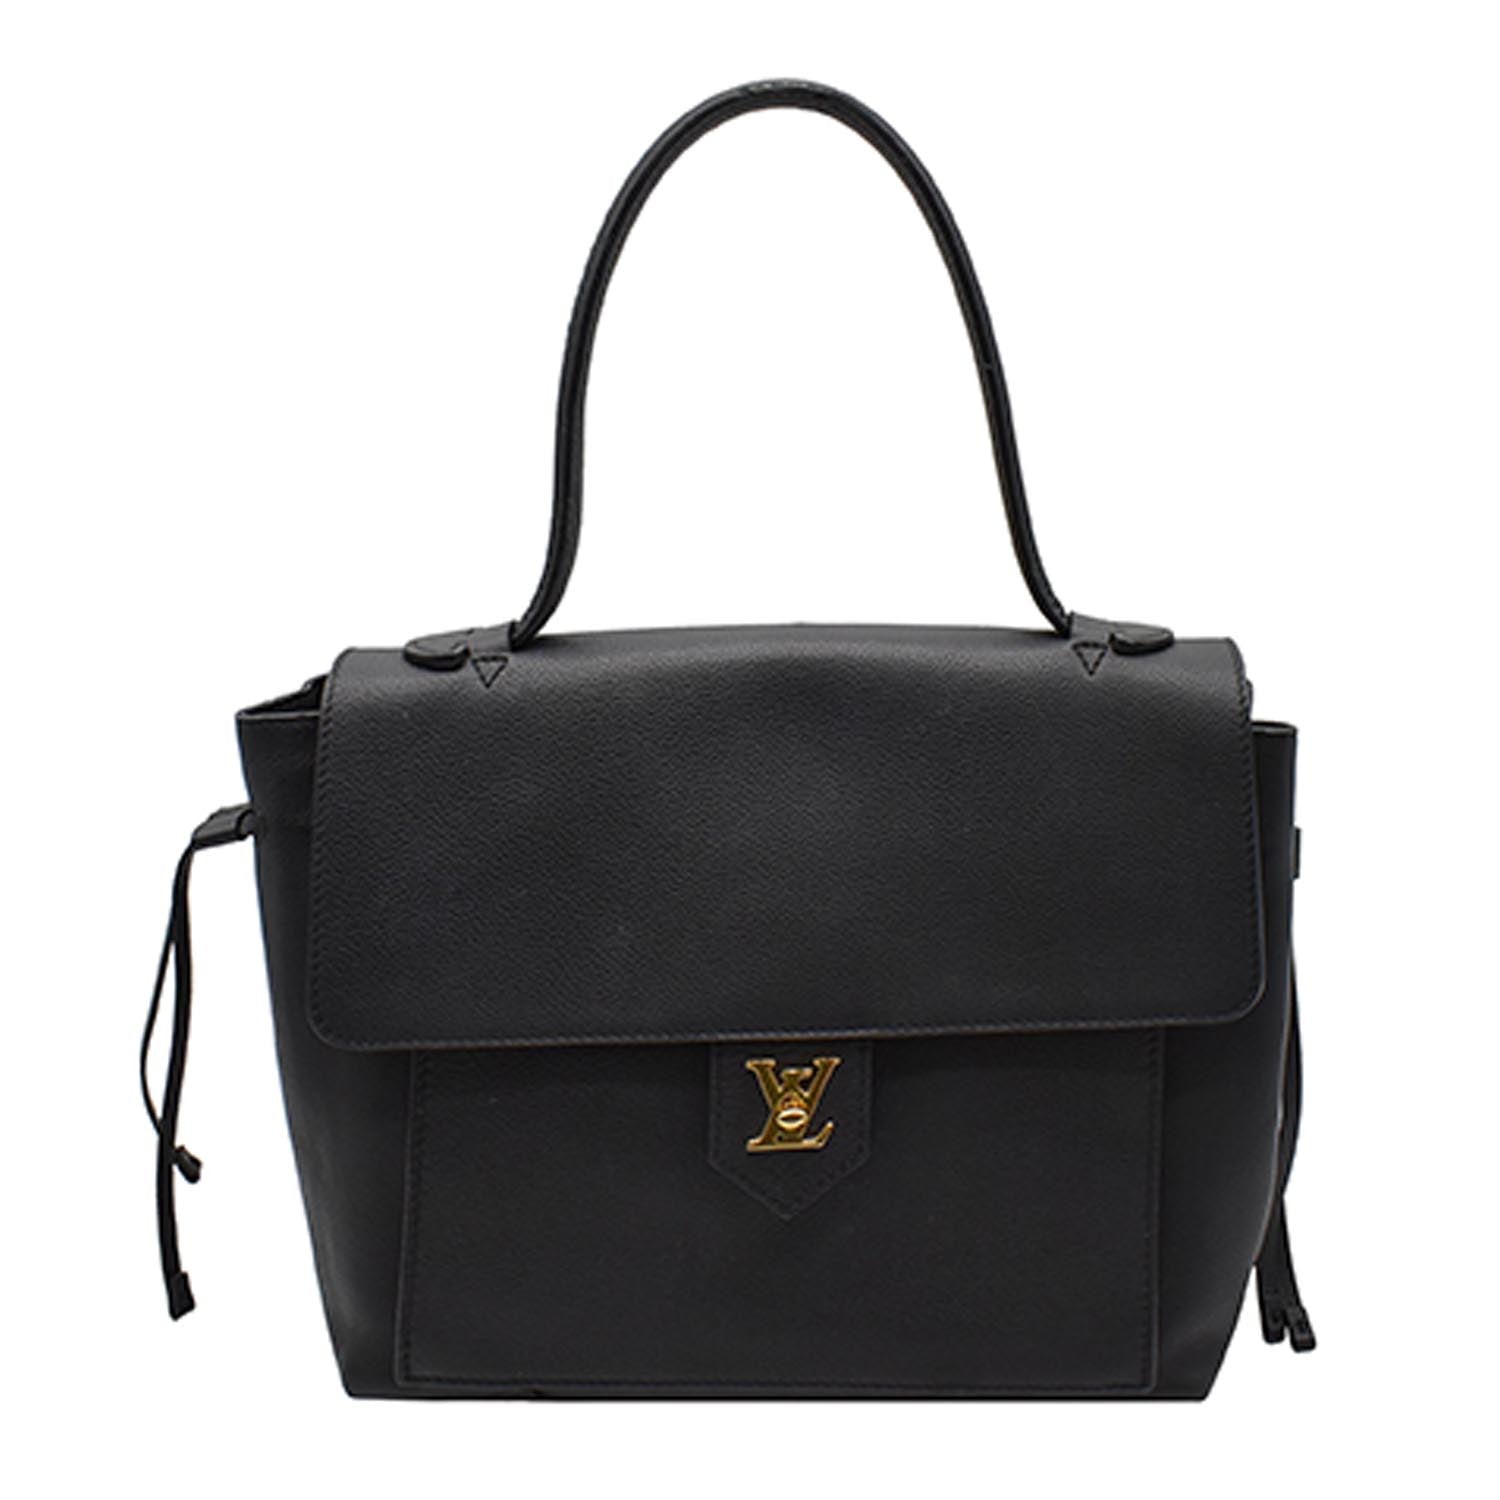 Lockmeto Satchel (Authentic Pre-Owned) – The Lady Bag